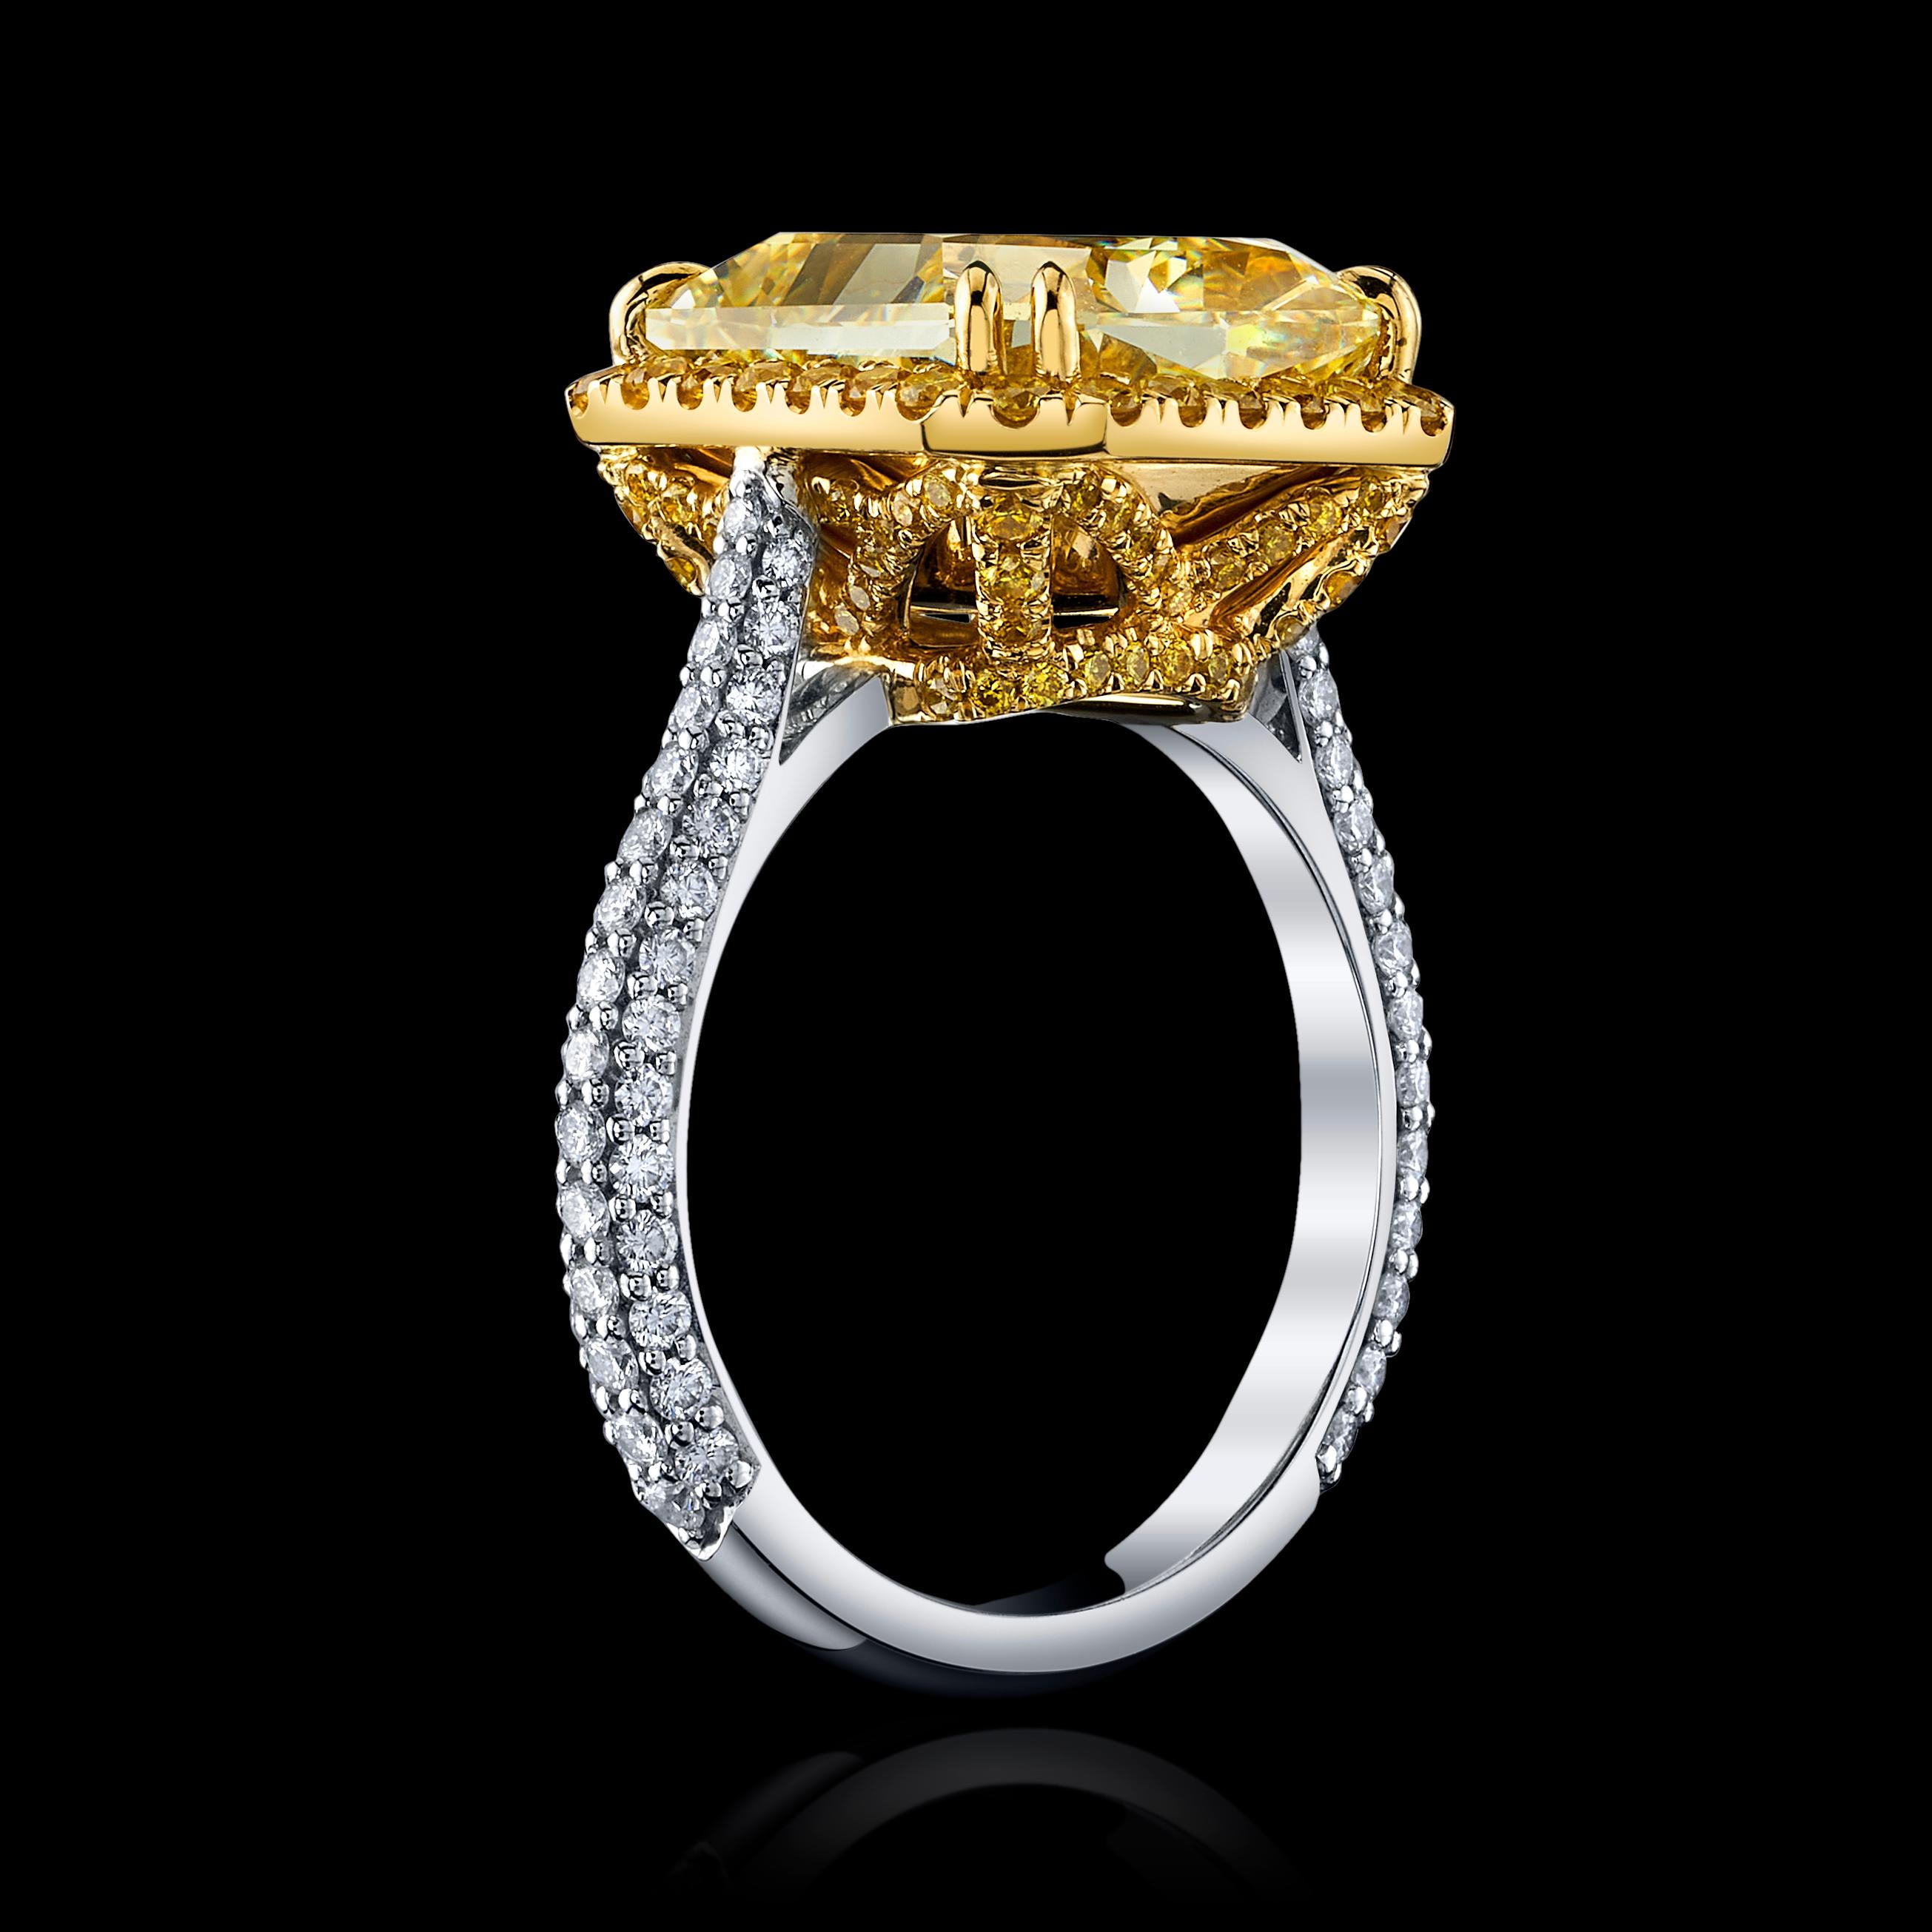 A SPECTACULAR 8.02CT RADIANT FANCY YELLOW DIAMOND IF CLARITY

8.02ct RAD, FY, IF, set in Platinum + 18K gold

 + 0.68cttw = 106 pcs yellow diamonds melee 

+ 0.58cttw = 86 pcs diamond melee on shank. 

GIA # 2215800335